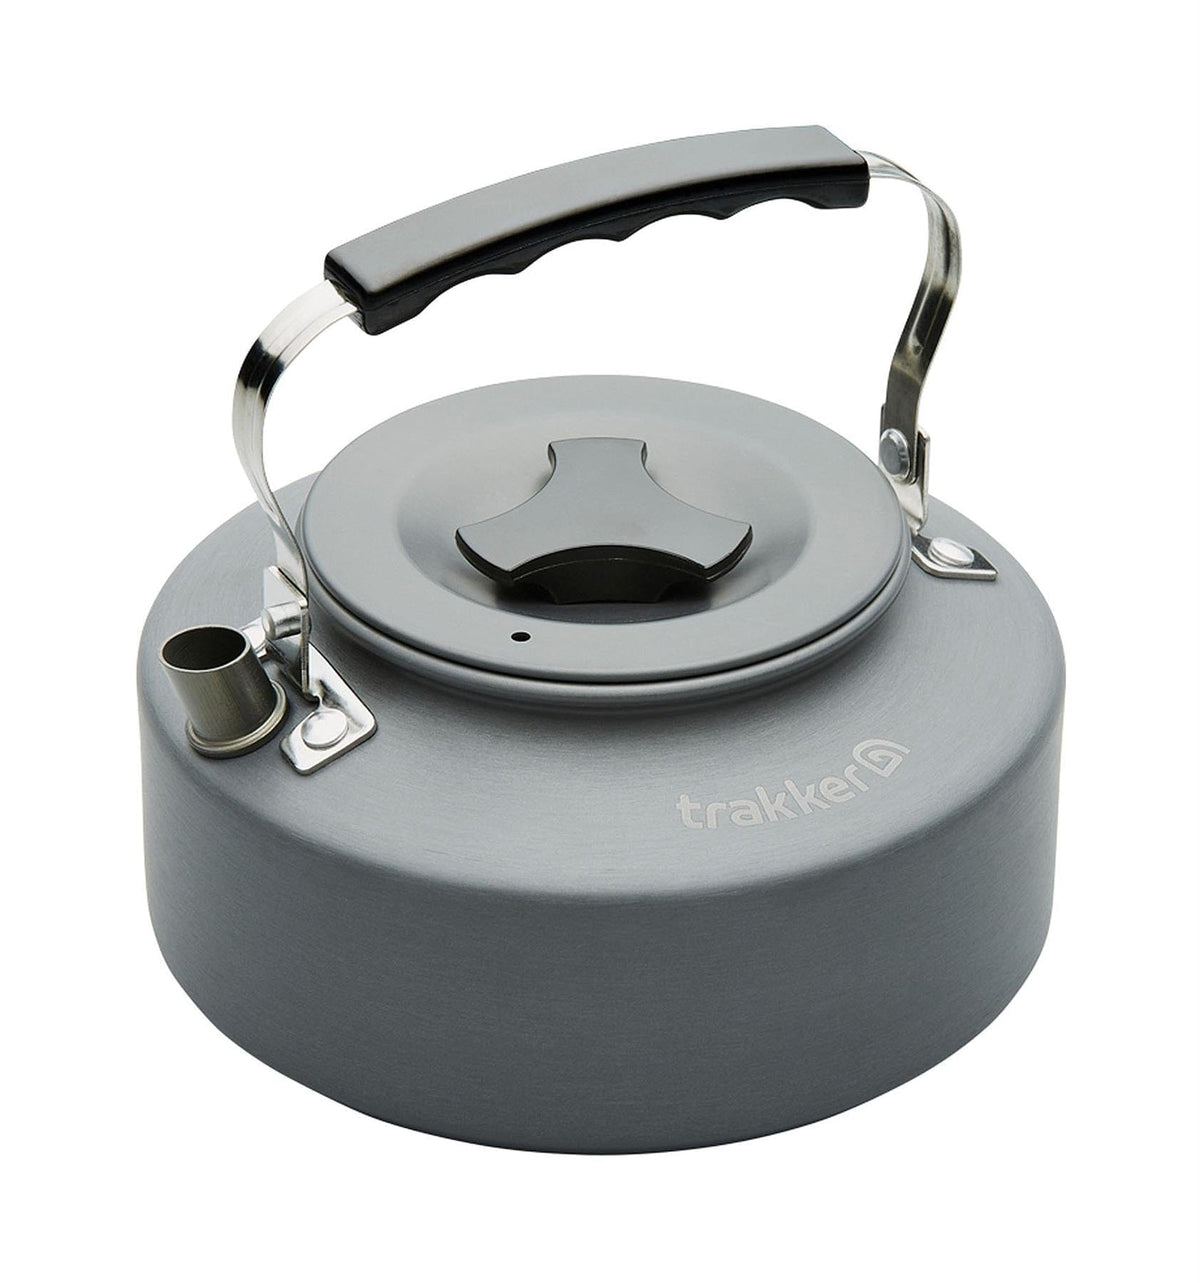 Trakker Armolife CG-3 Stove and Kettle Deal.